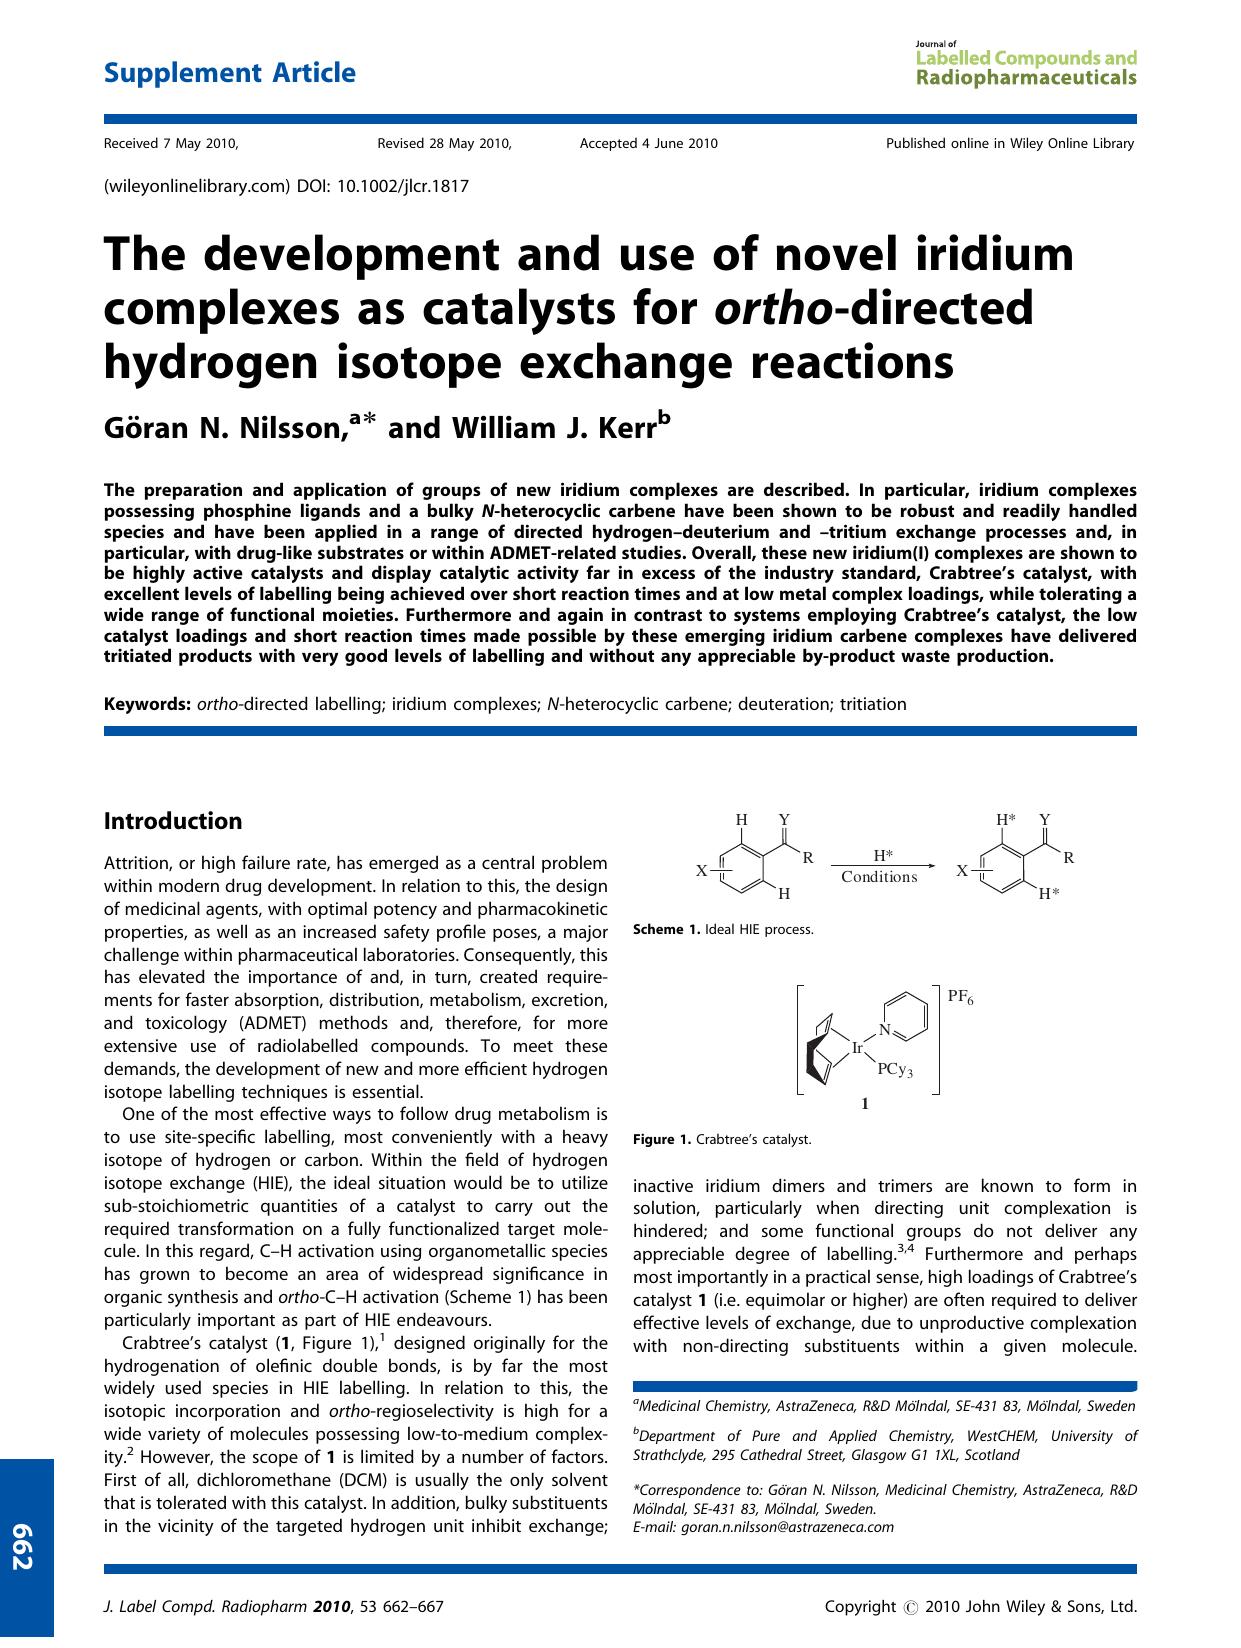 The development and use of novel iridium complexes as catalysts for orthodirected hydrogen isotope exchange reactions by Unknown